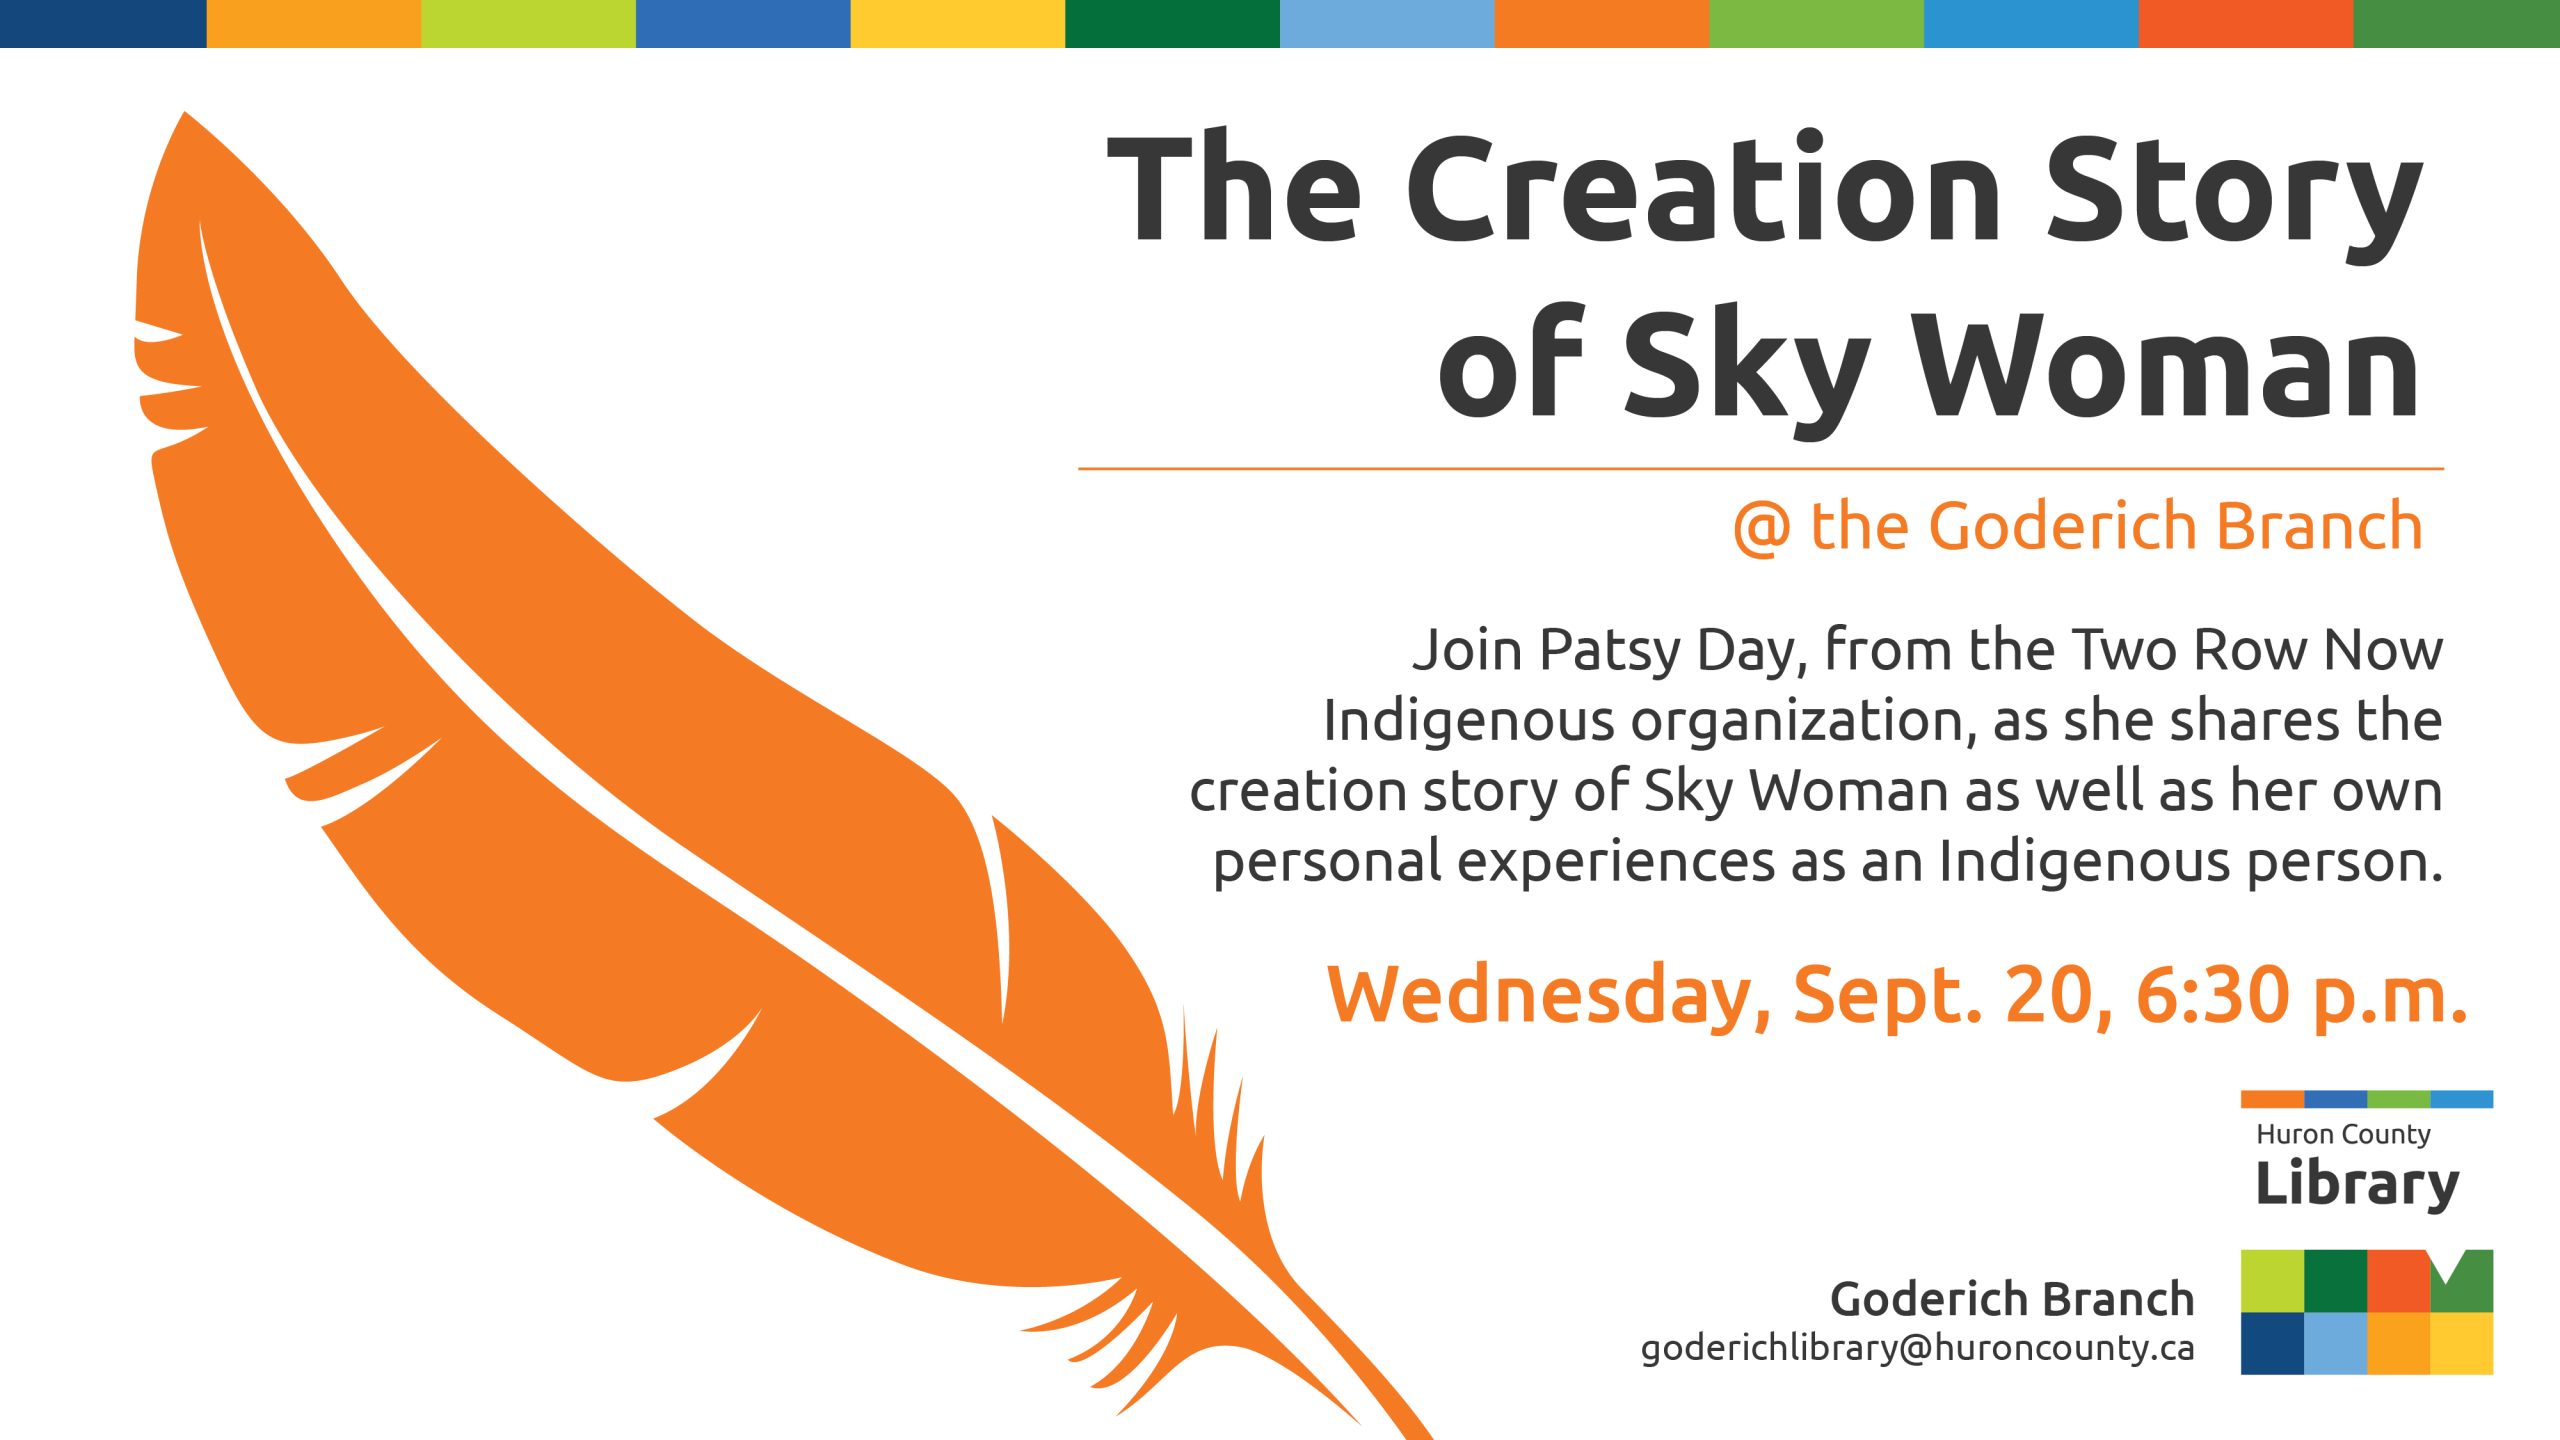 Illustration of an orange feather with text promoting The Creation Story of Sky Woman event at Goderich Branch